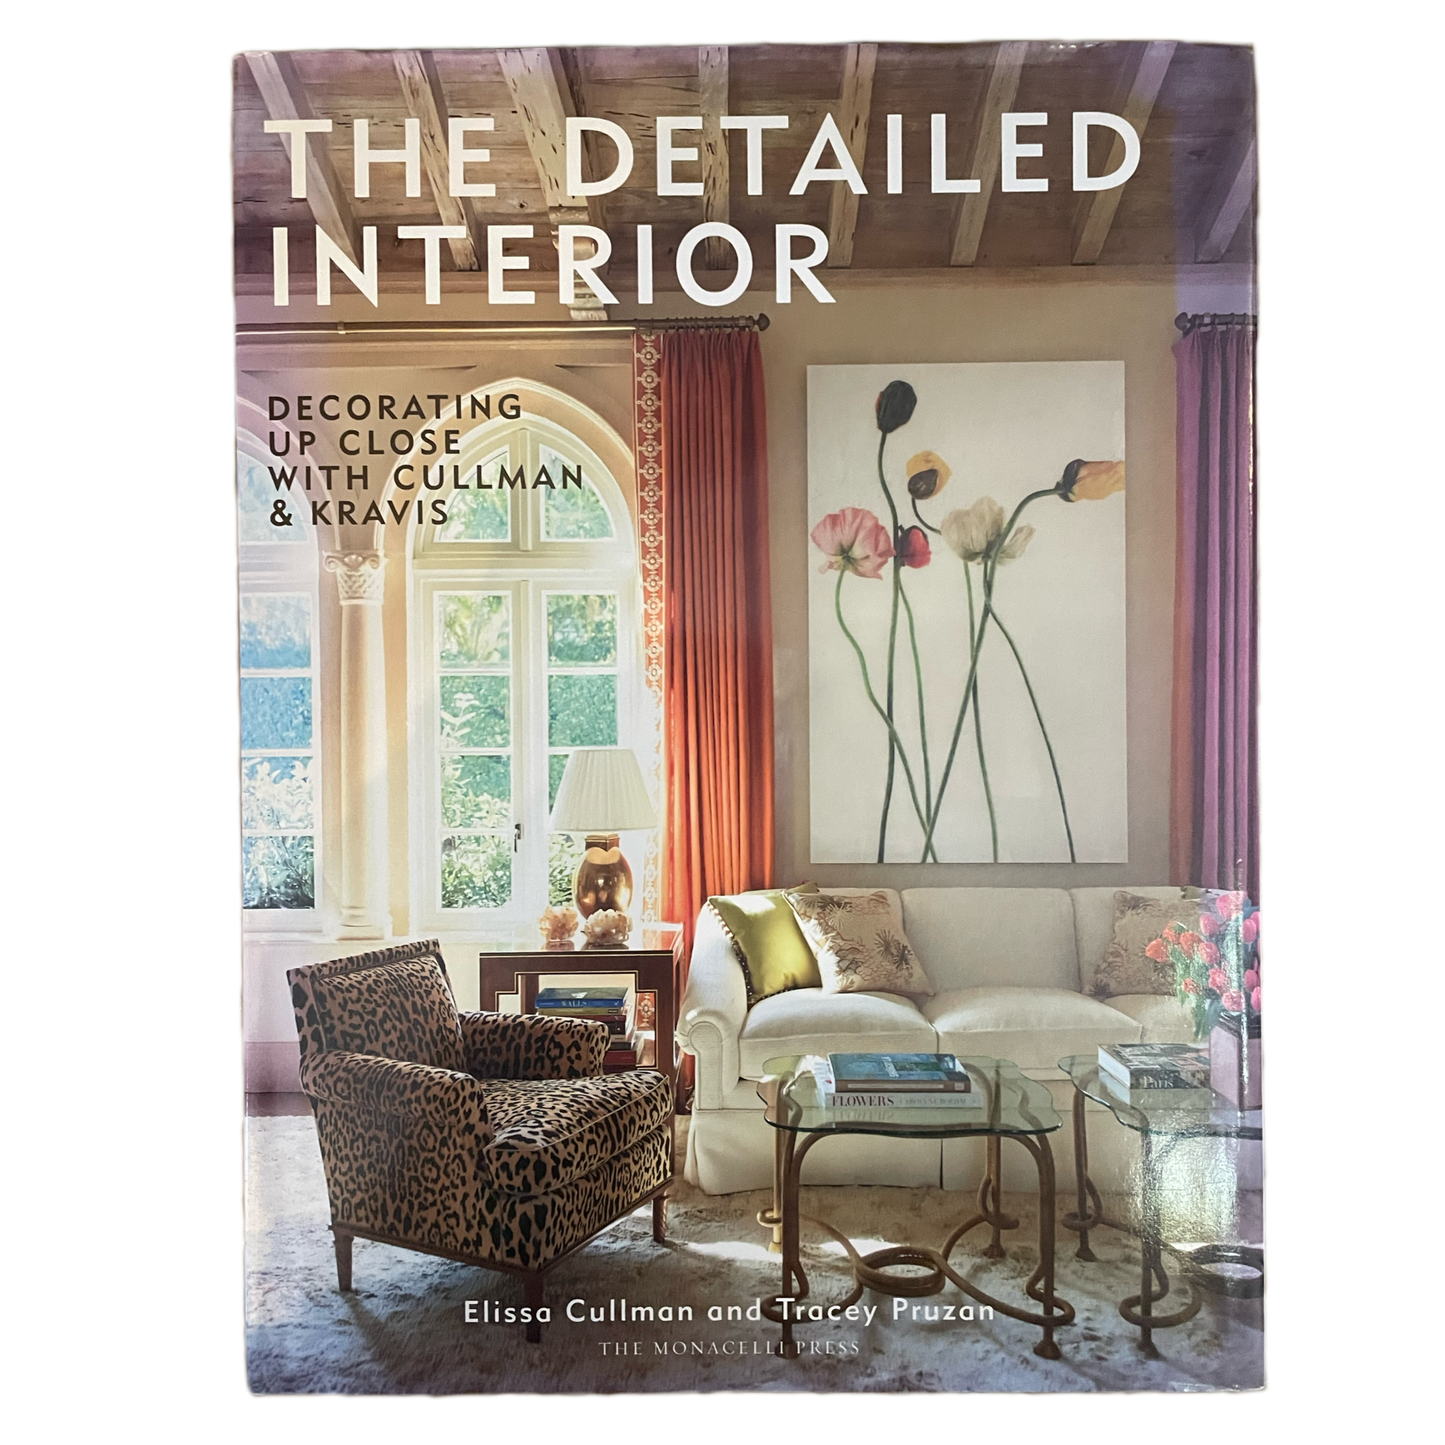 The Detailed Interior by Elissa Cullman & Tracey Pruzan